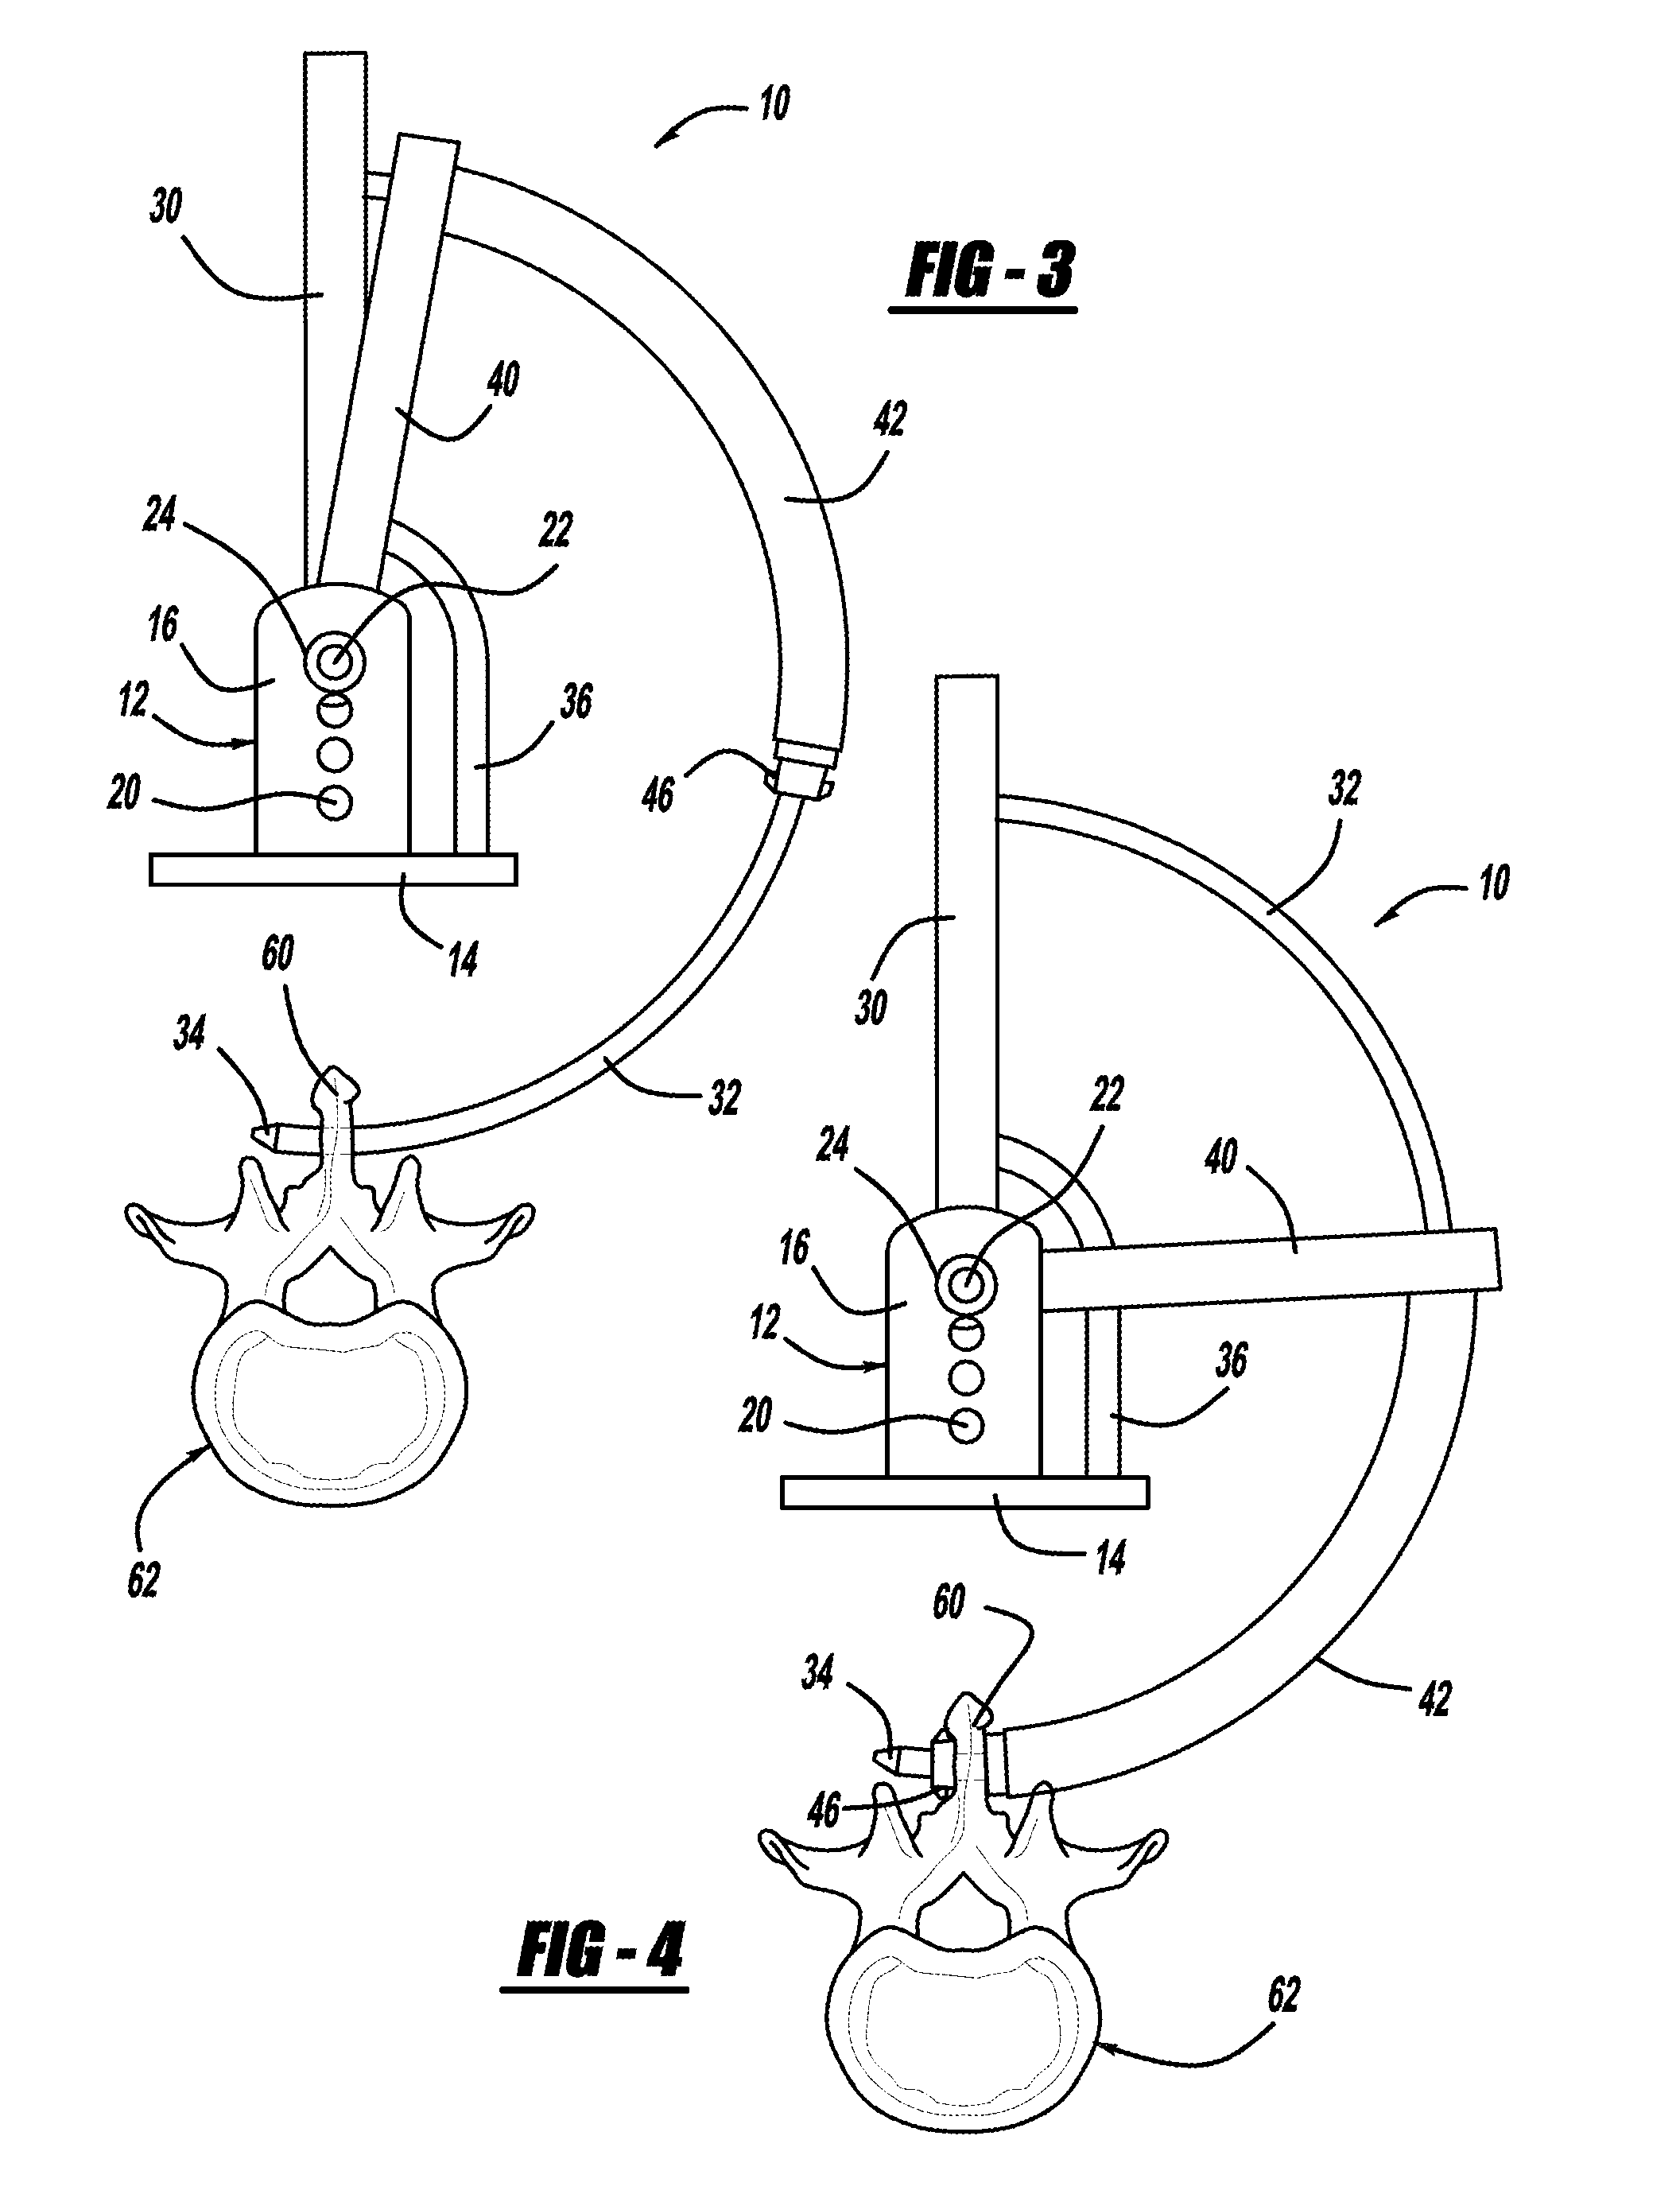 Interspinous process spacer device including a rotatable retaining member